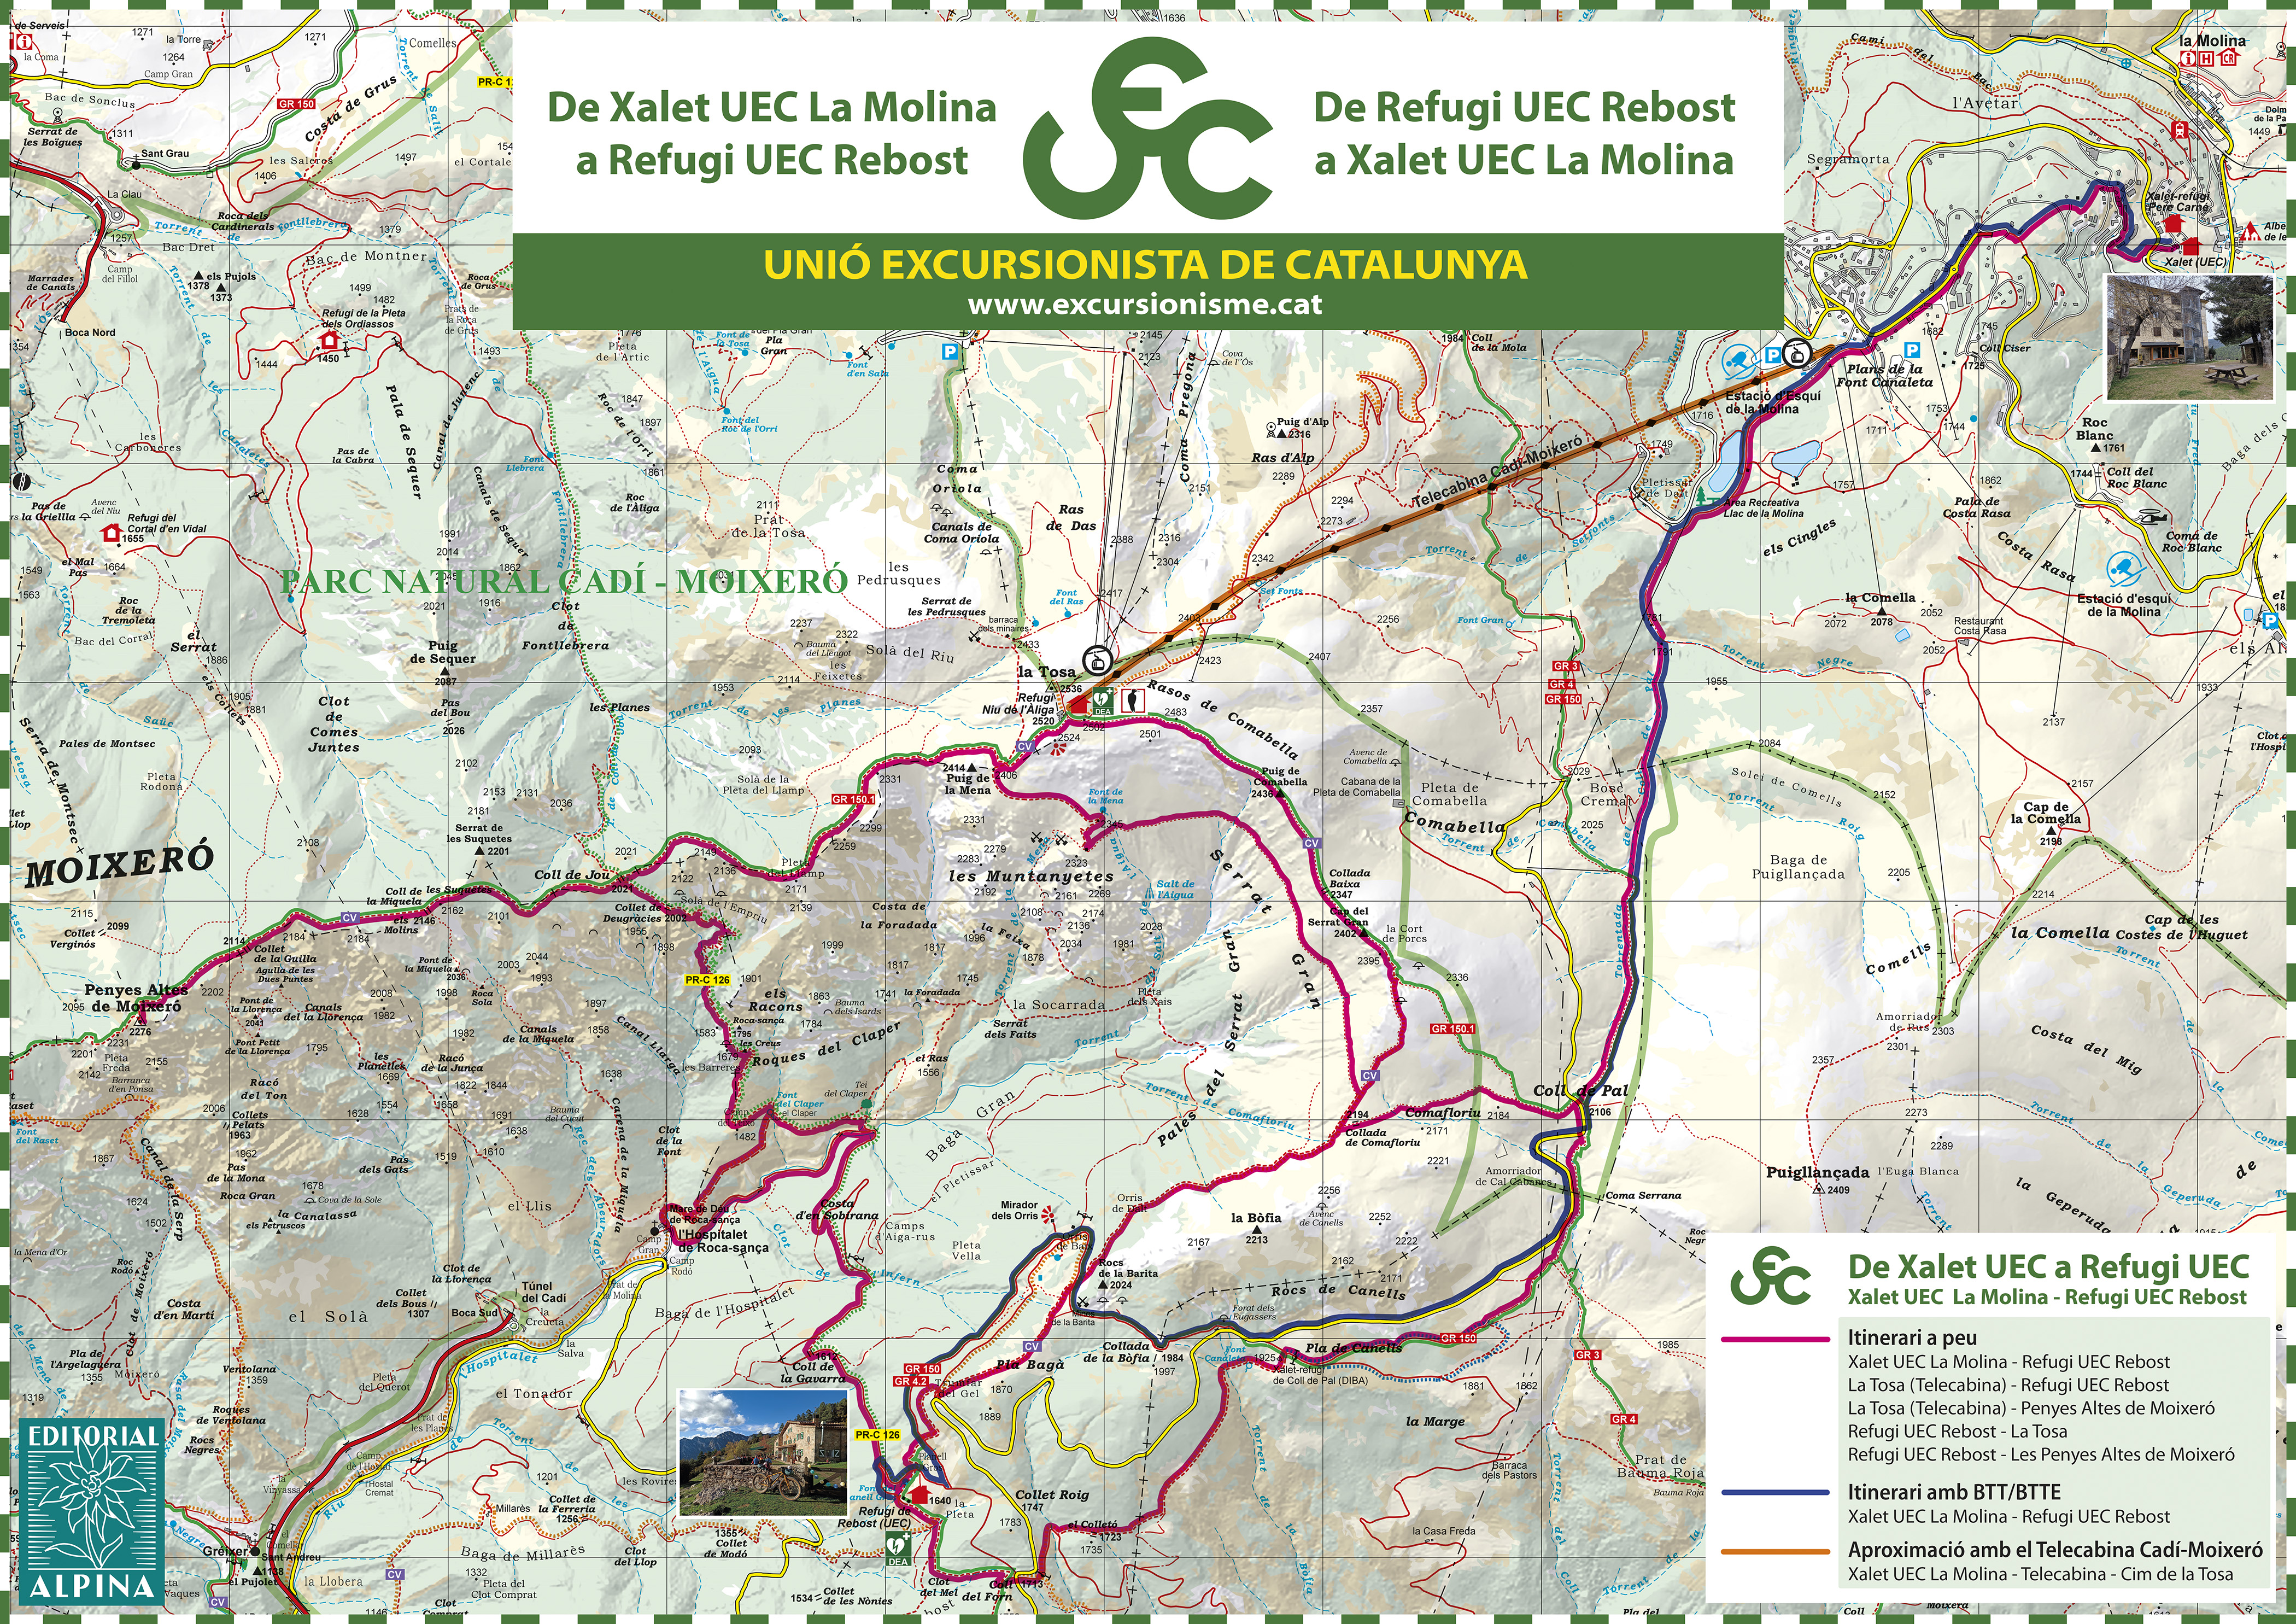 RECOMMENDED WALKING ROUTES BY THE UEC